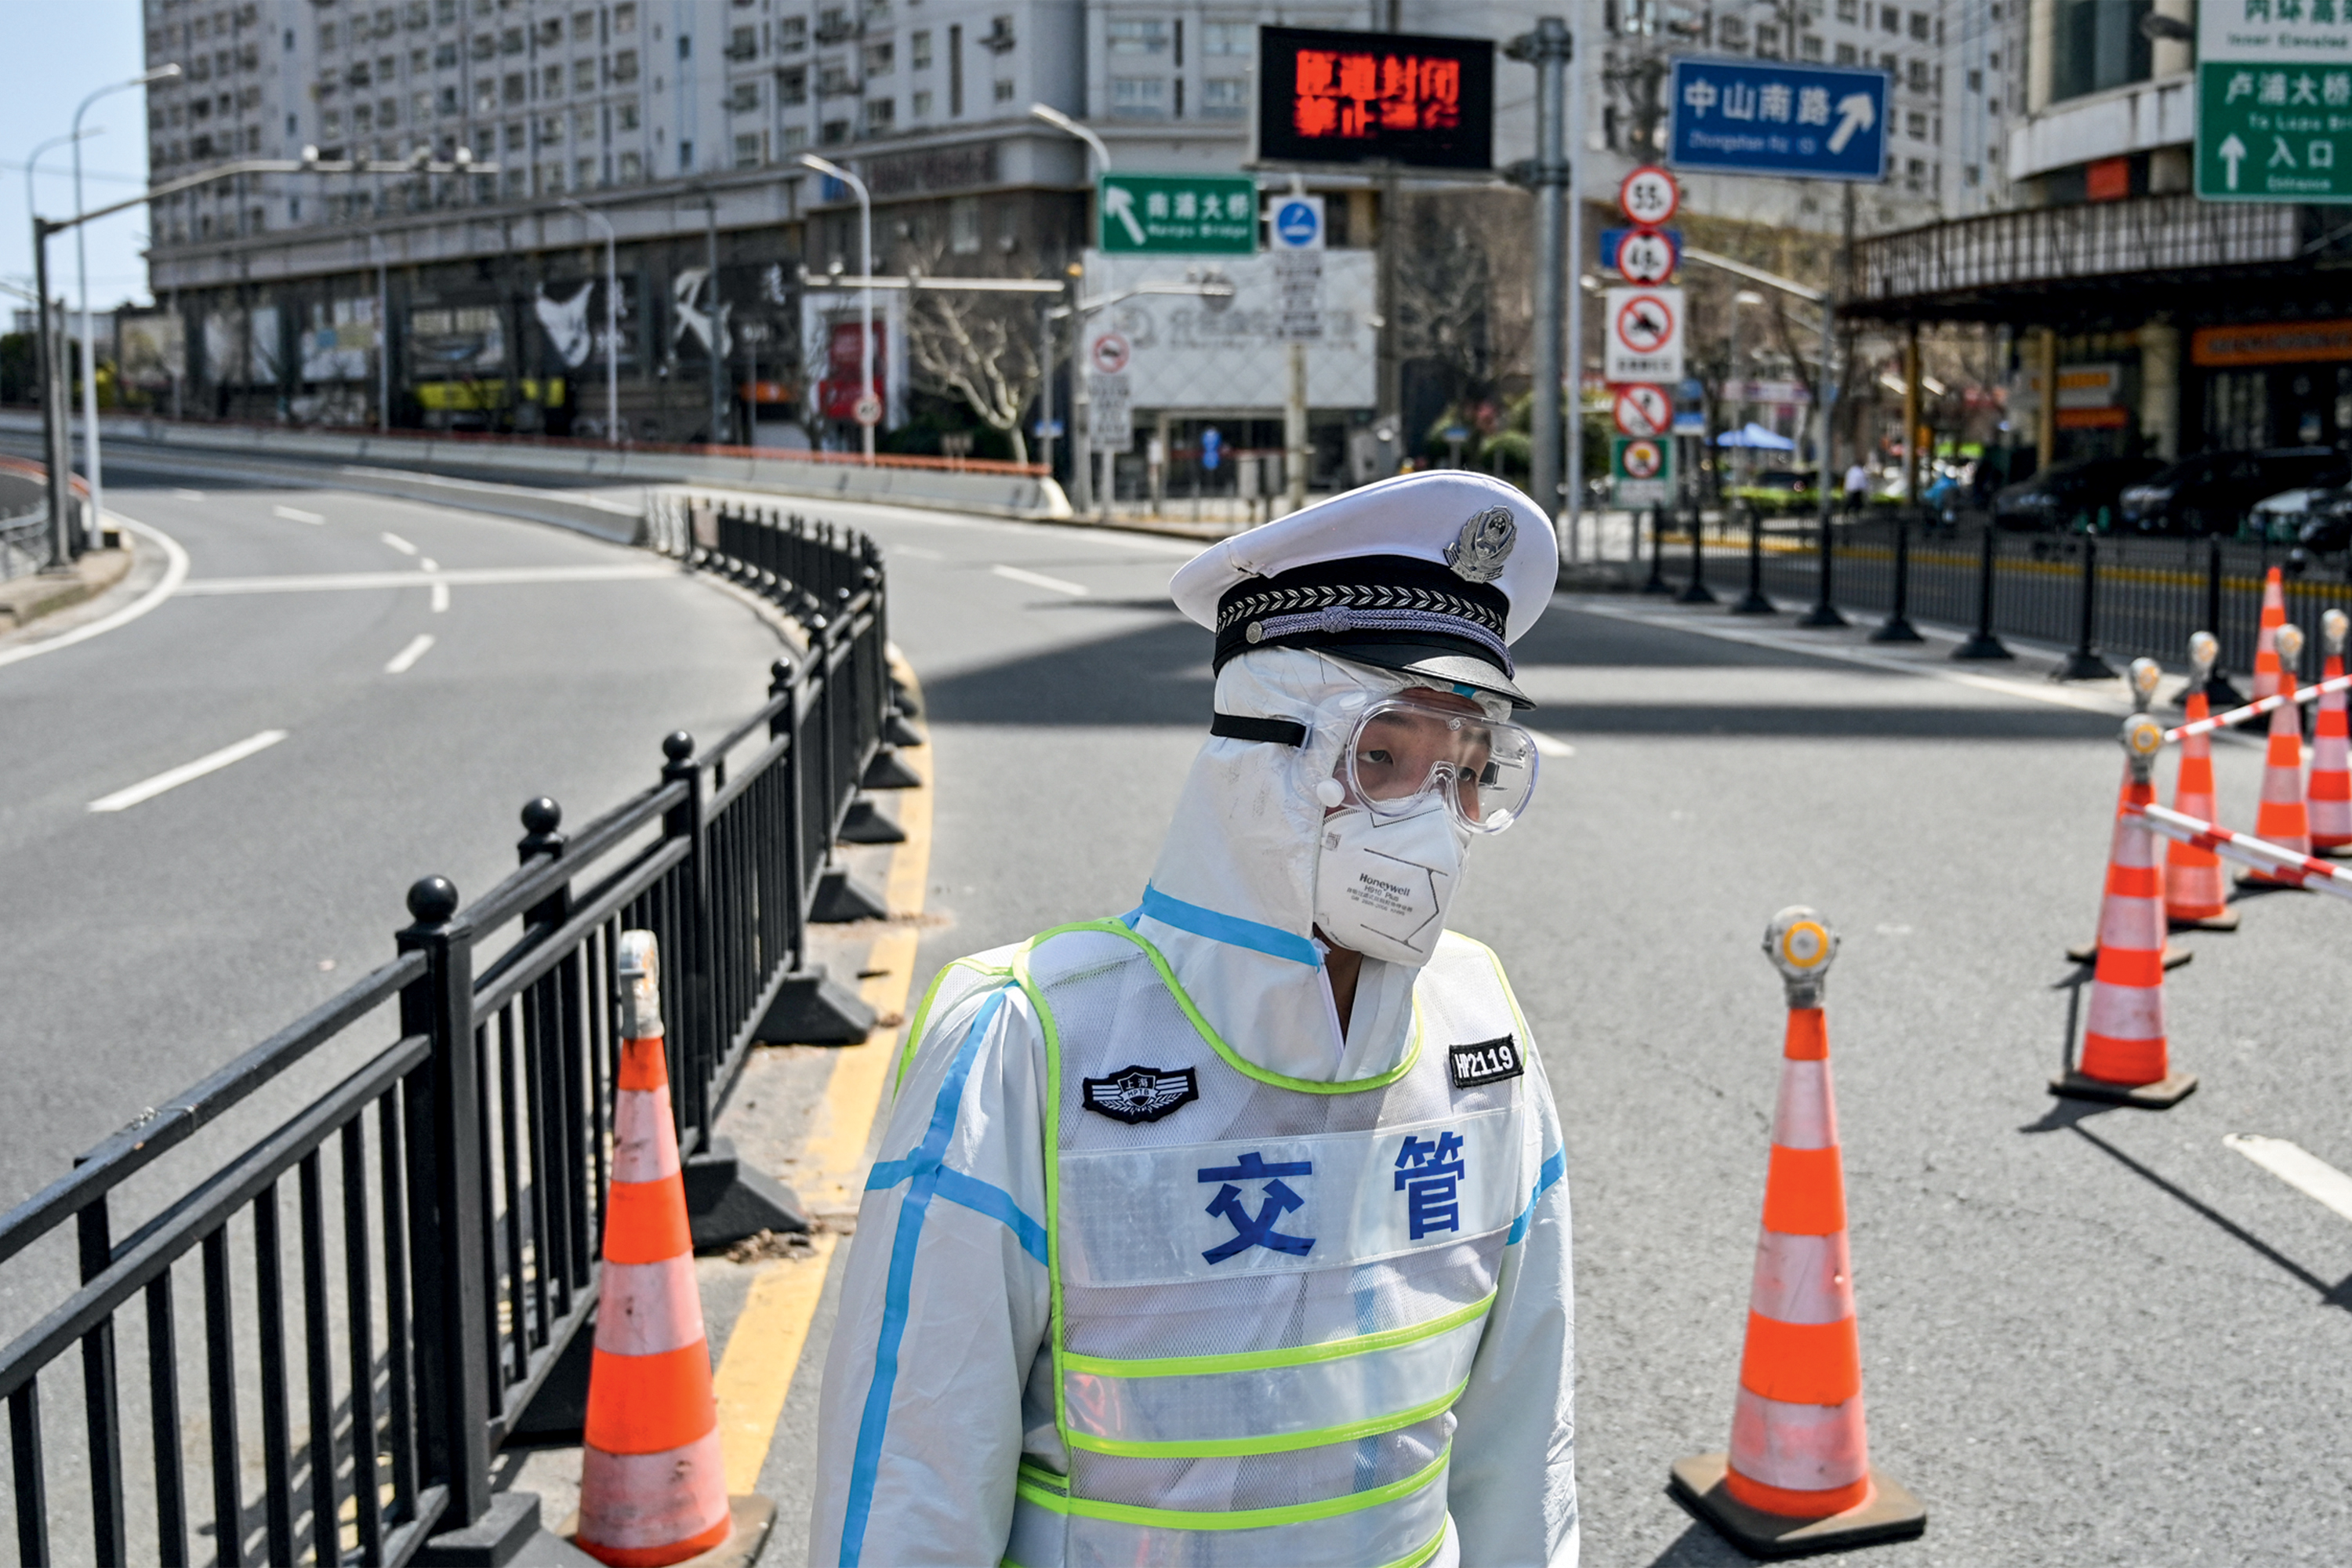 A transit officer, wearing a protective gear, controls access to a bridge in the direction of Pudong district in lockdown as a measure against the Covid-19 coronavirus, in Shanghai on March 29, 2022. (Photo by Hector RETAMAL / AFP)